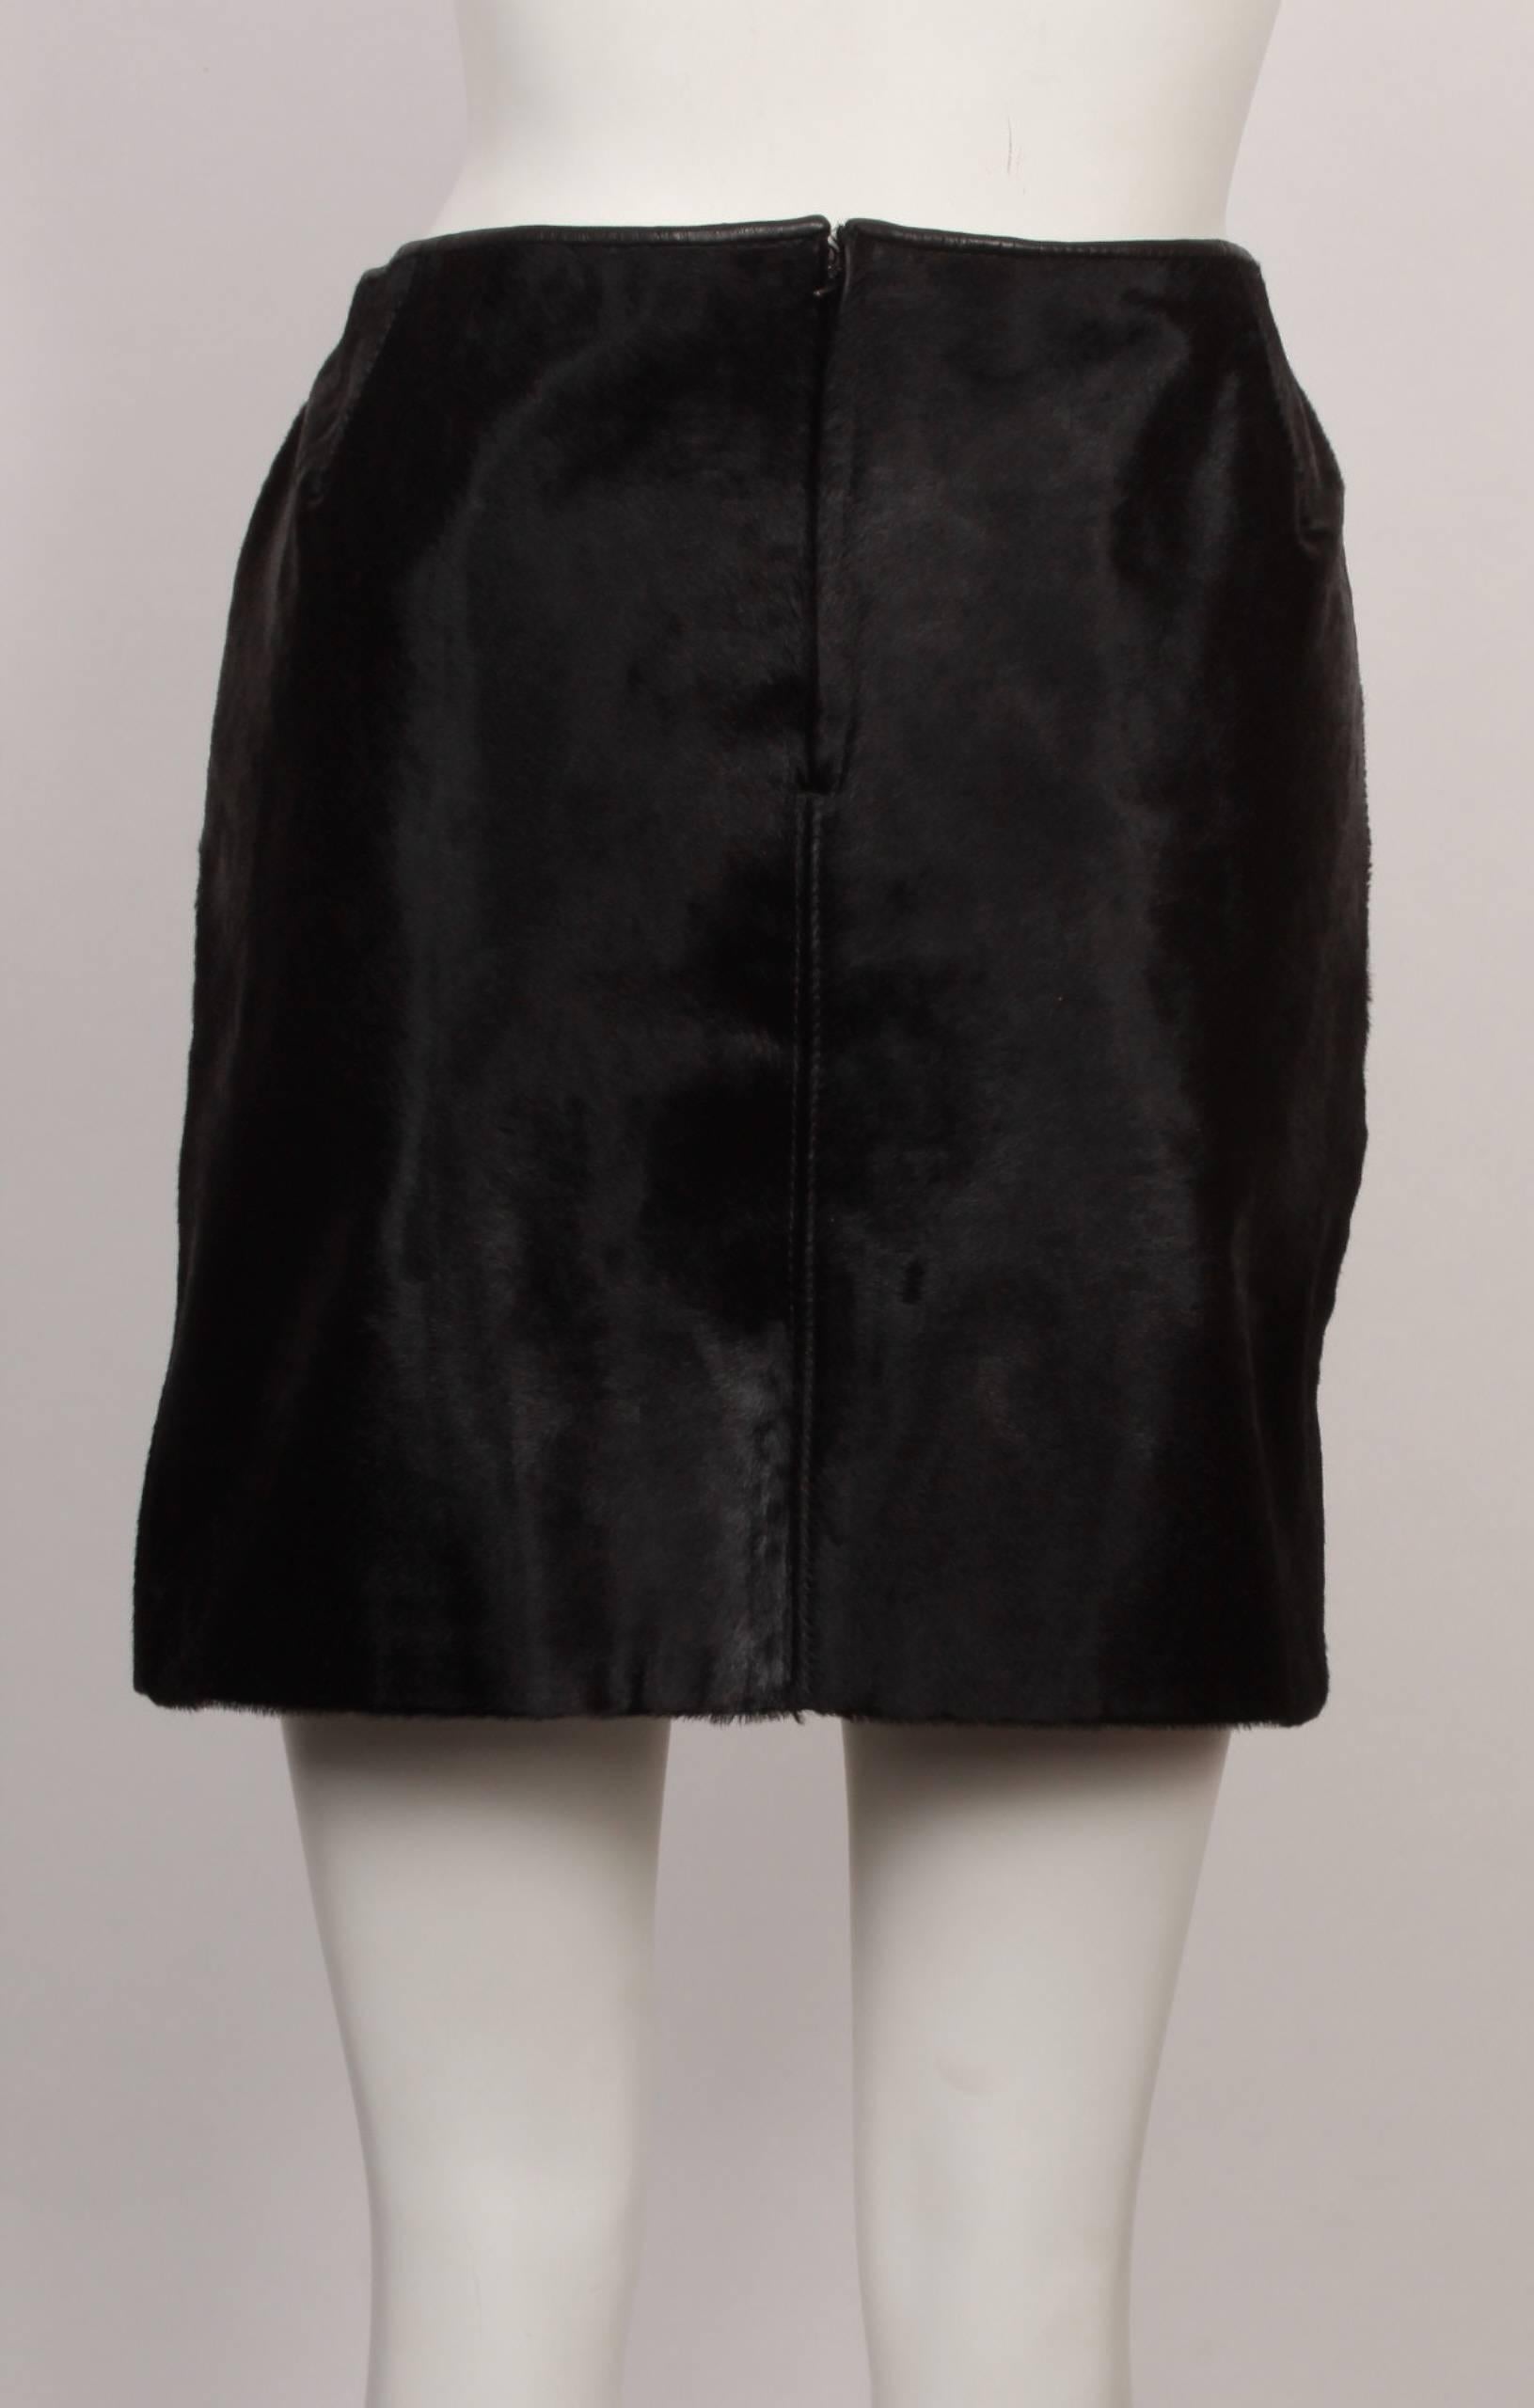 Dolce & Gabbana Black Pony Hair Leather Mini Skirt In Good Condition For Sale In Melbourne, Victoria